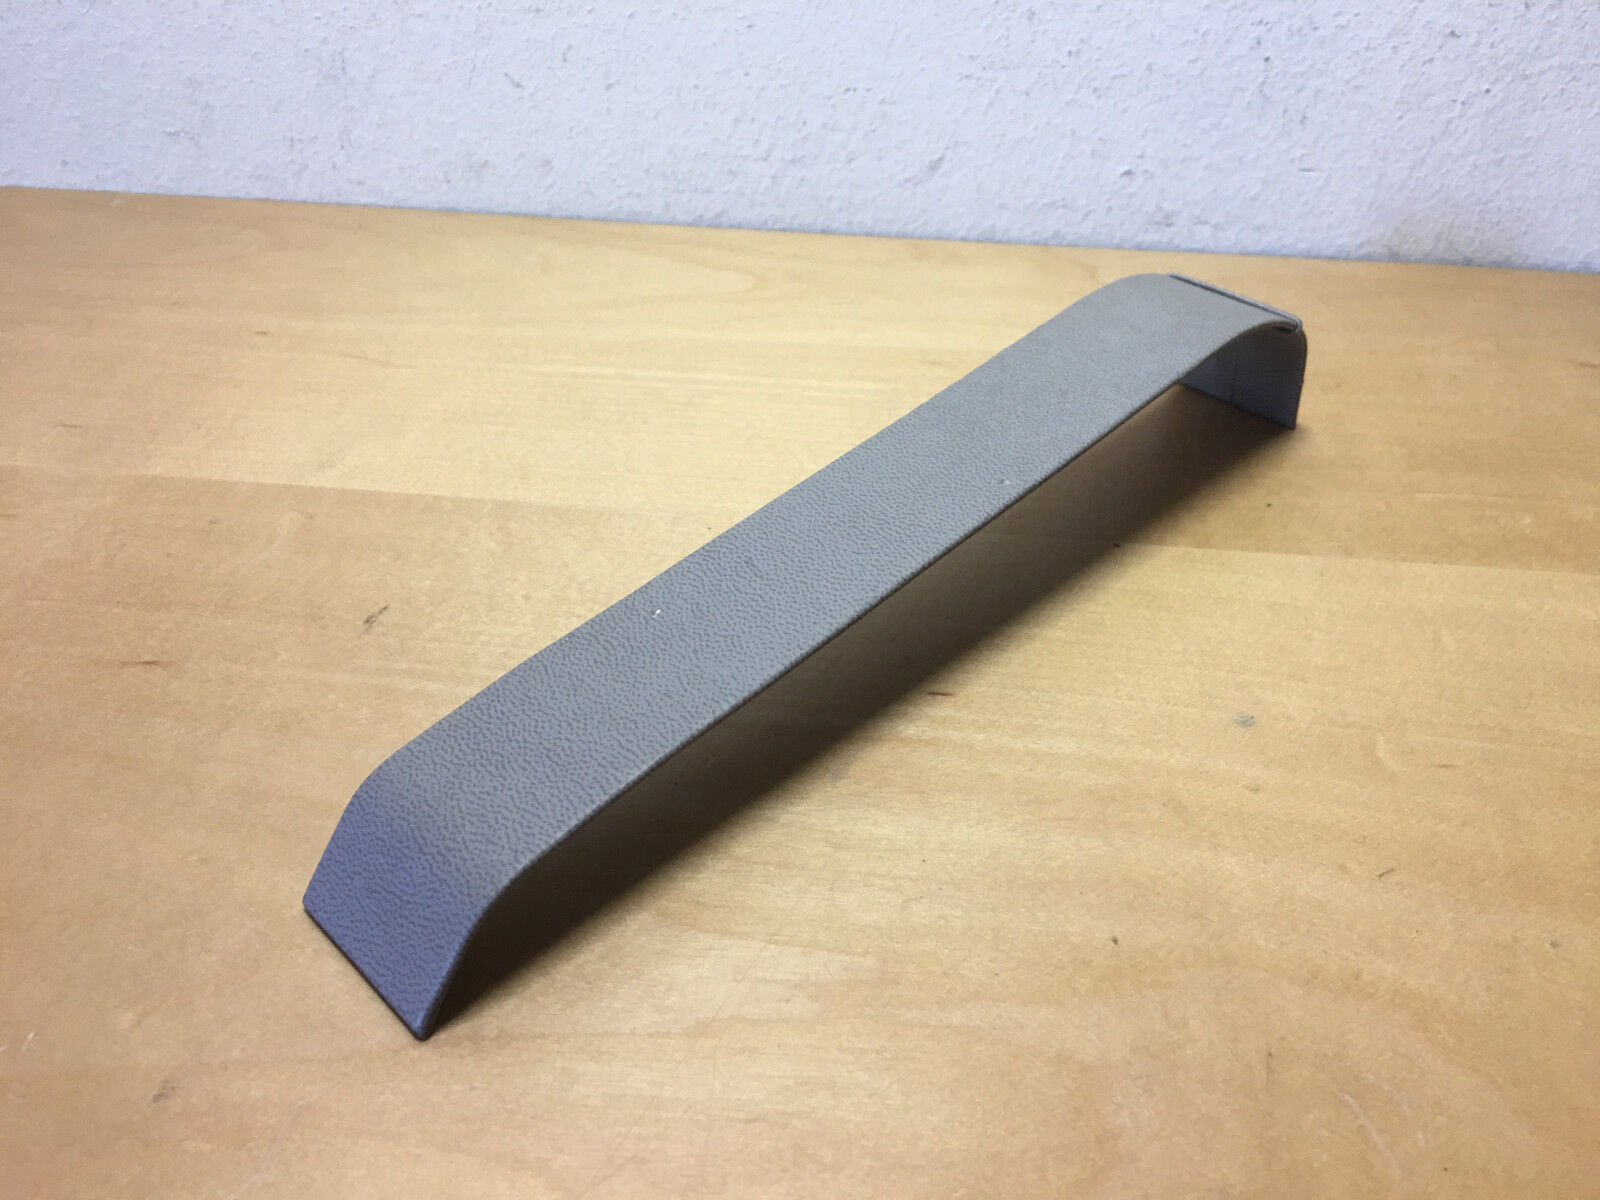 Used - Max 42% OFF Support For Watch Stand Holder 16in 2x1 3 Colo 1 Minneapolis Mall 8 Grey